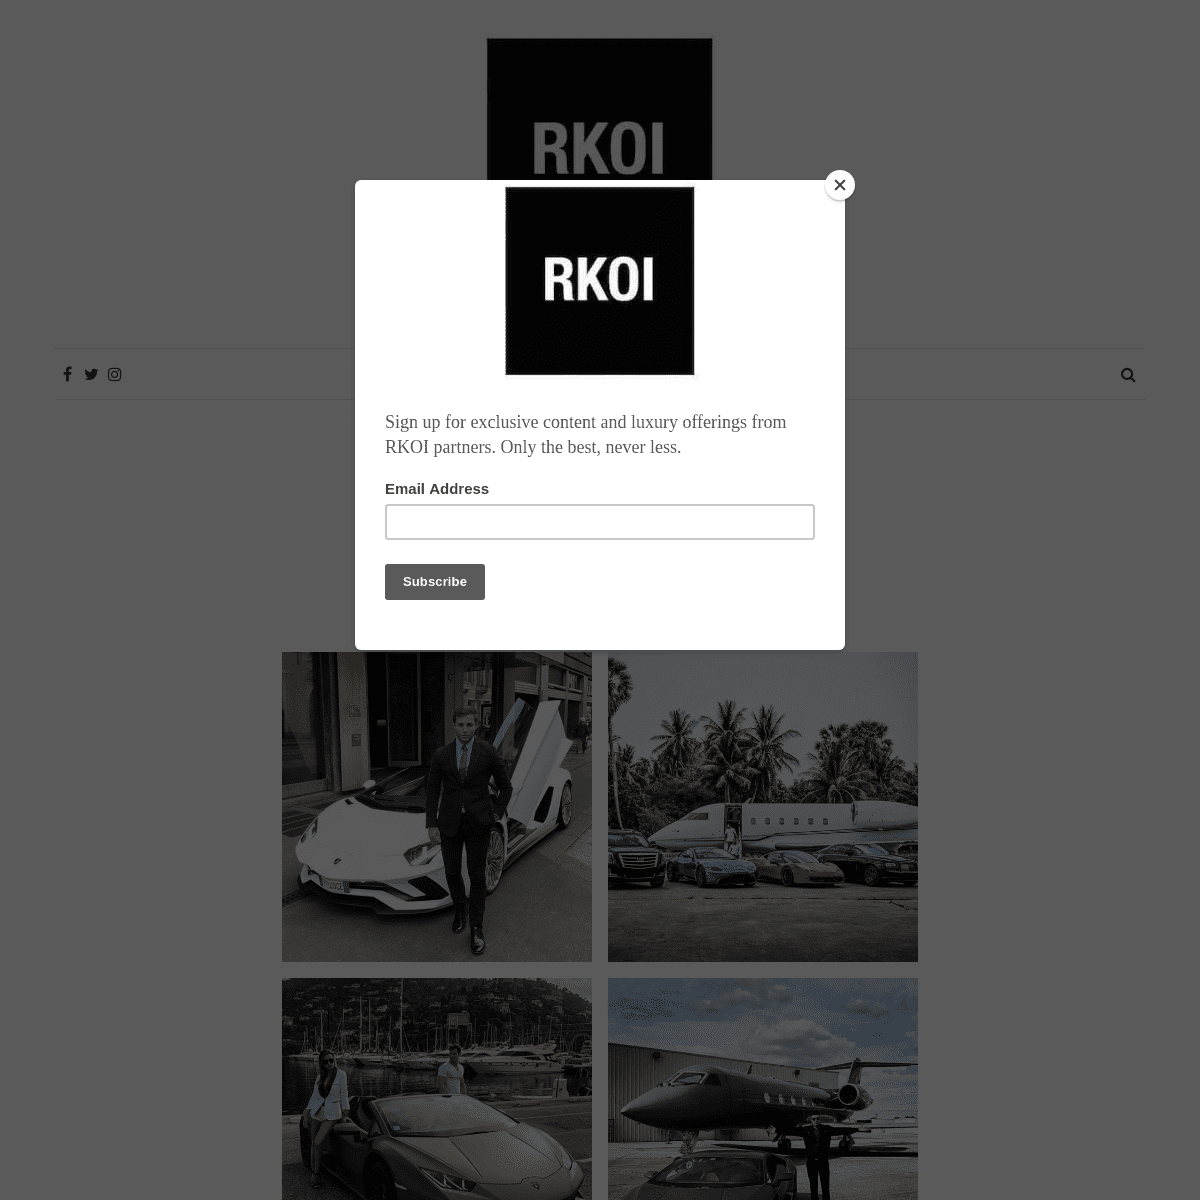 RKOI – we make experiences exceptional